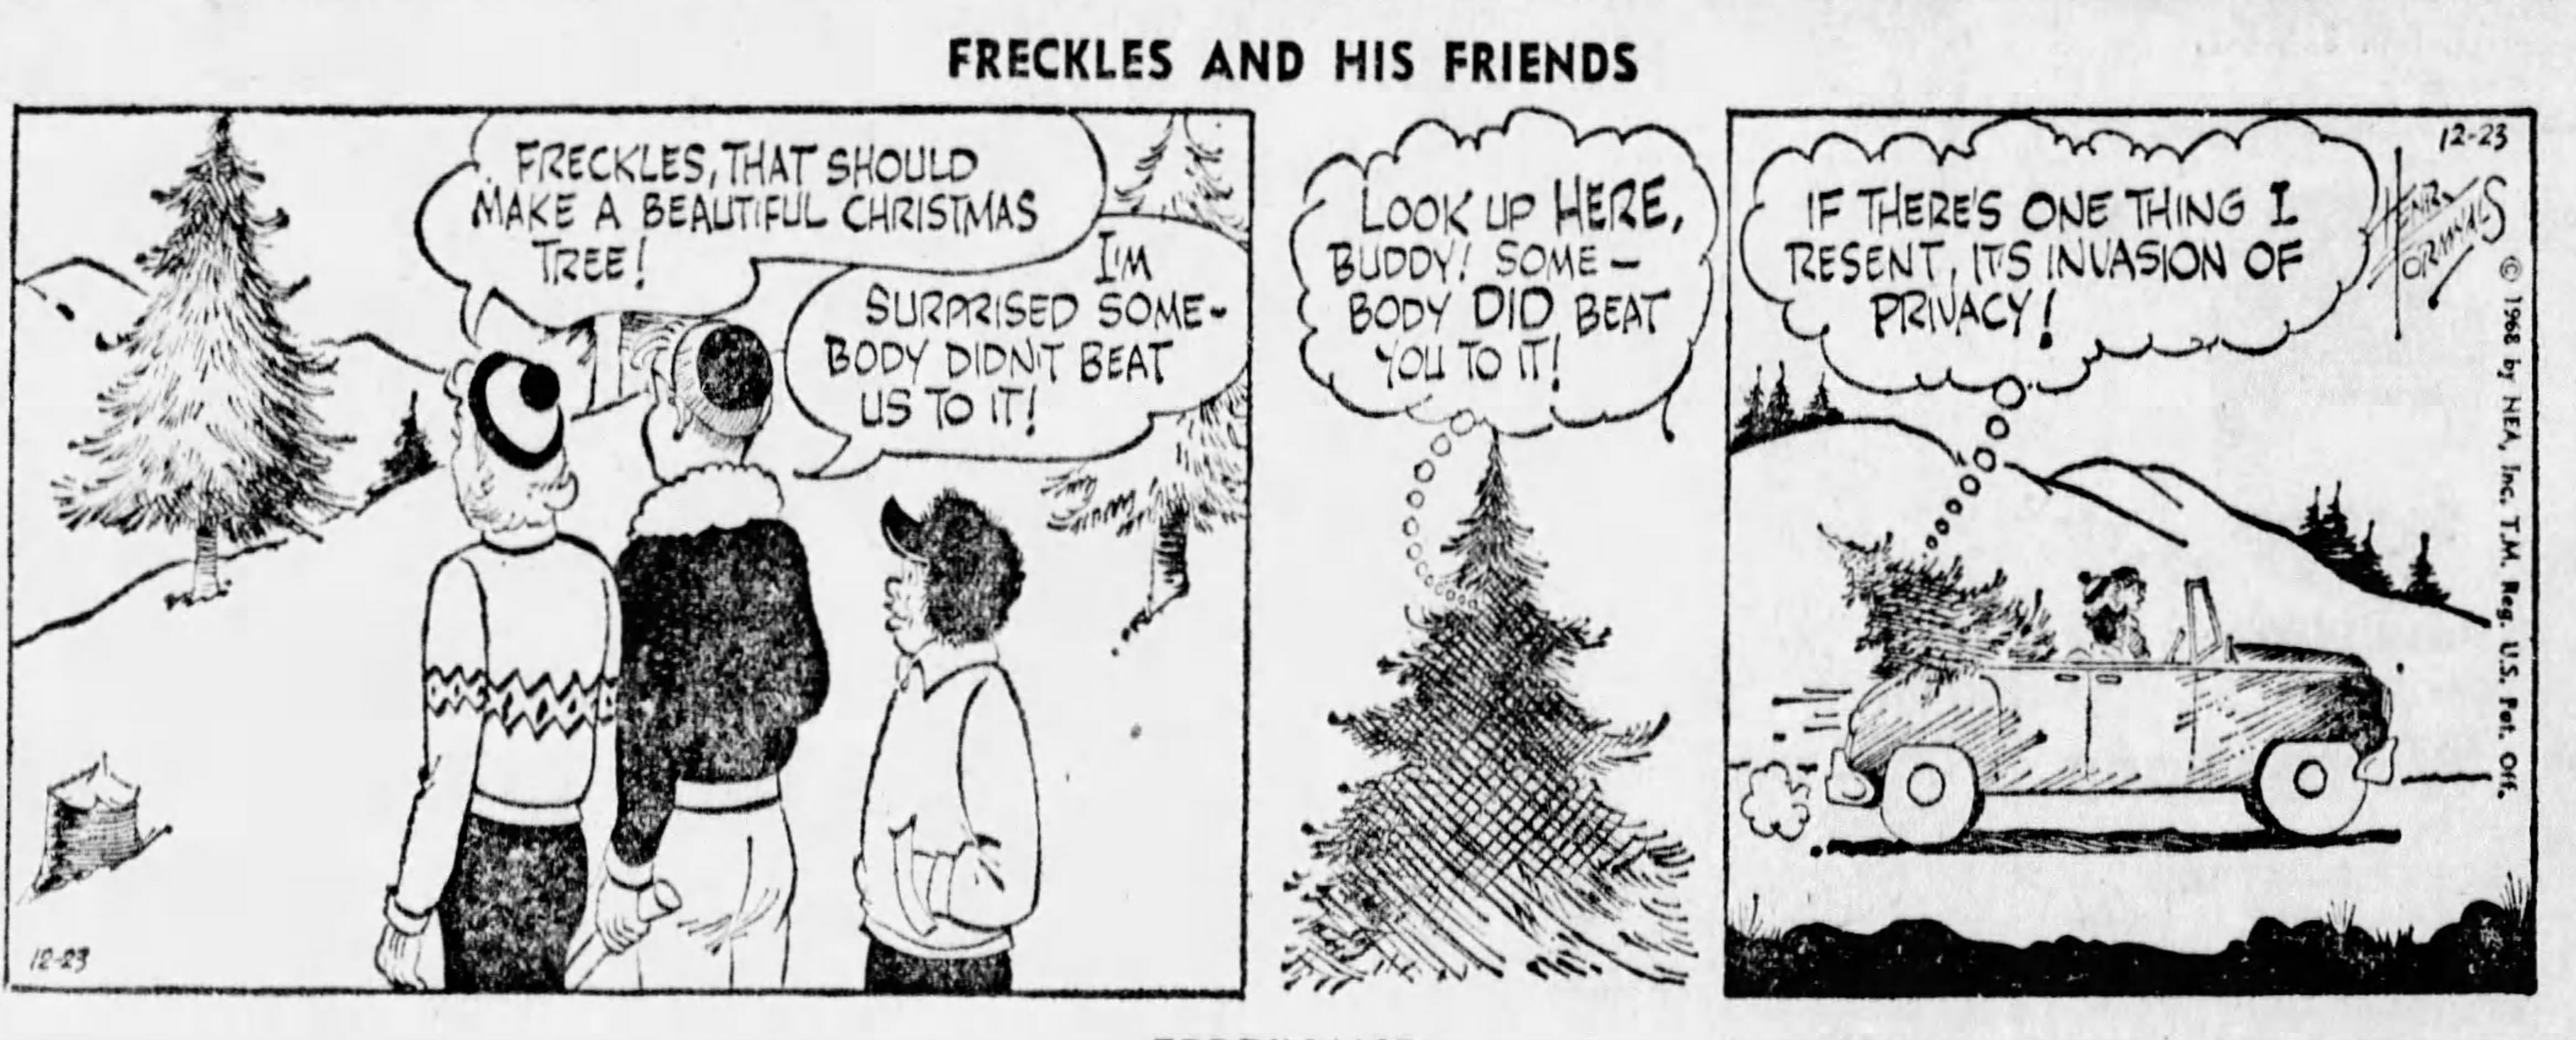 Freckles and His Friends, December 23, 1968